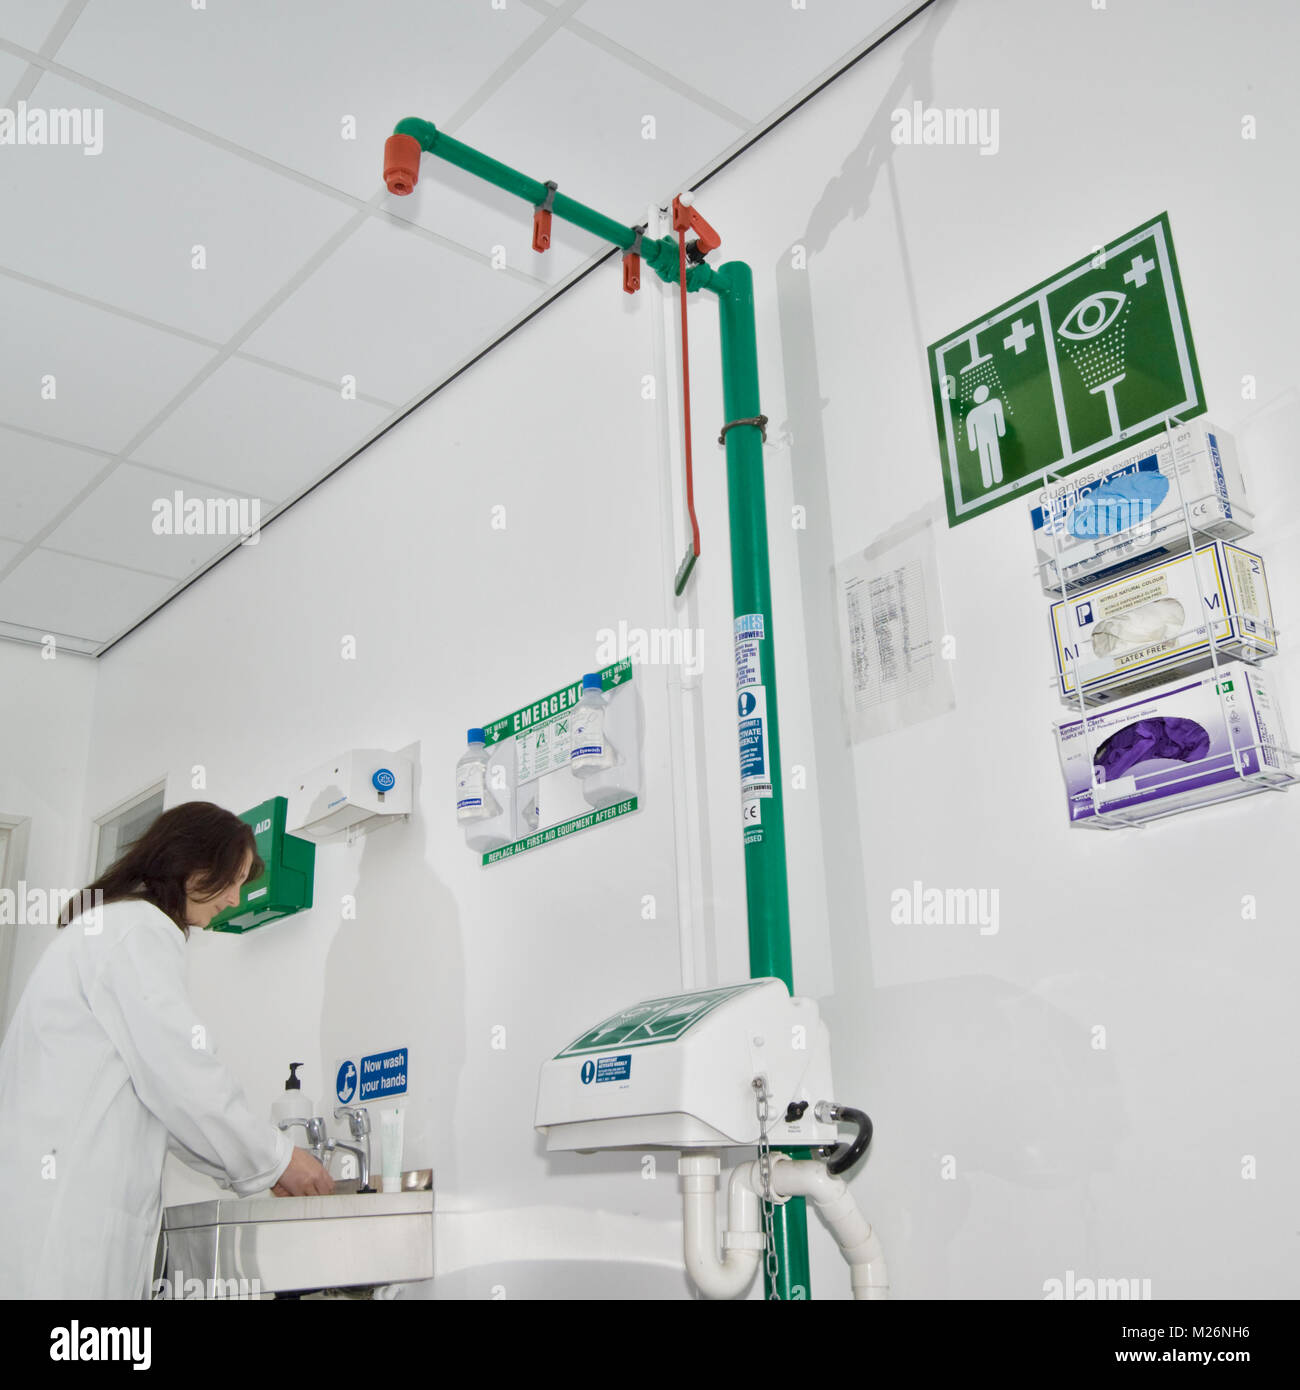 First-aid equipment in a UK science laboratory. Stock Photo